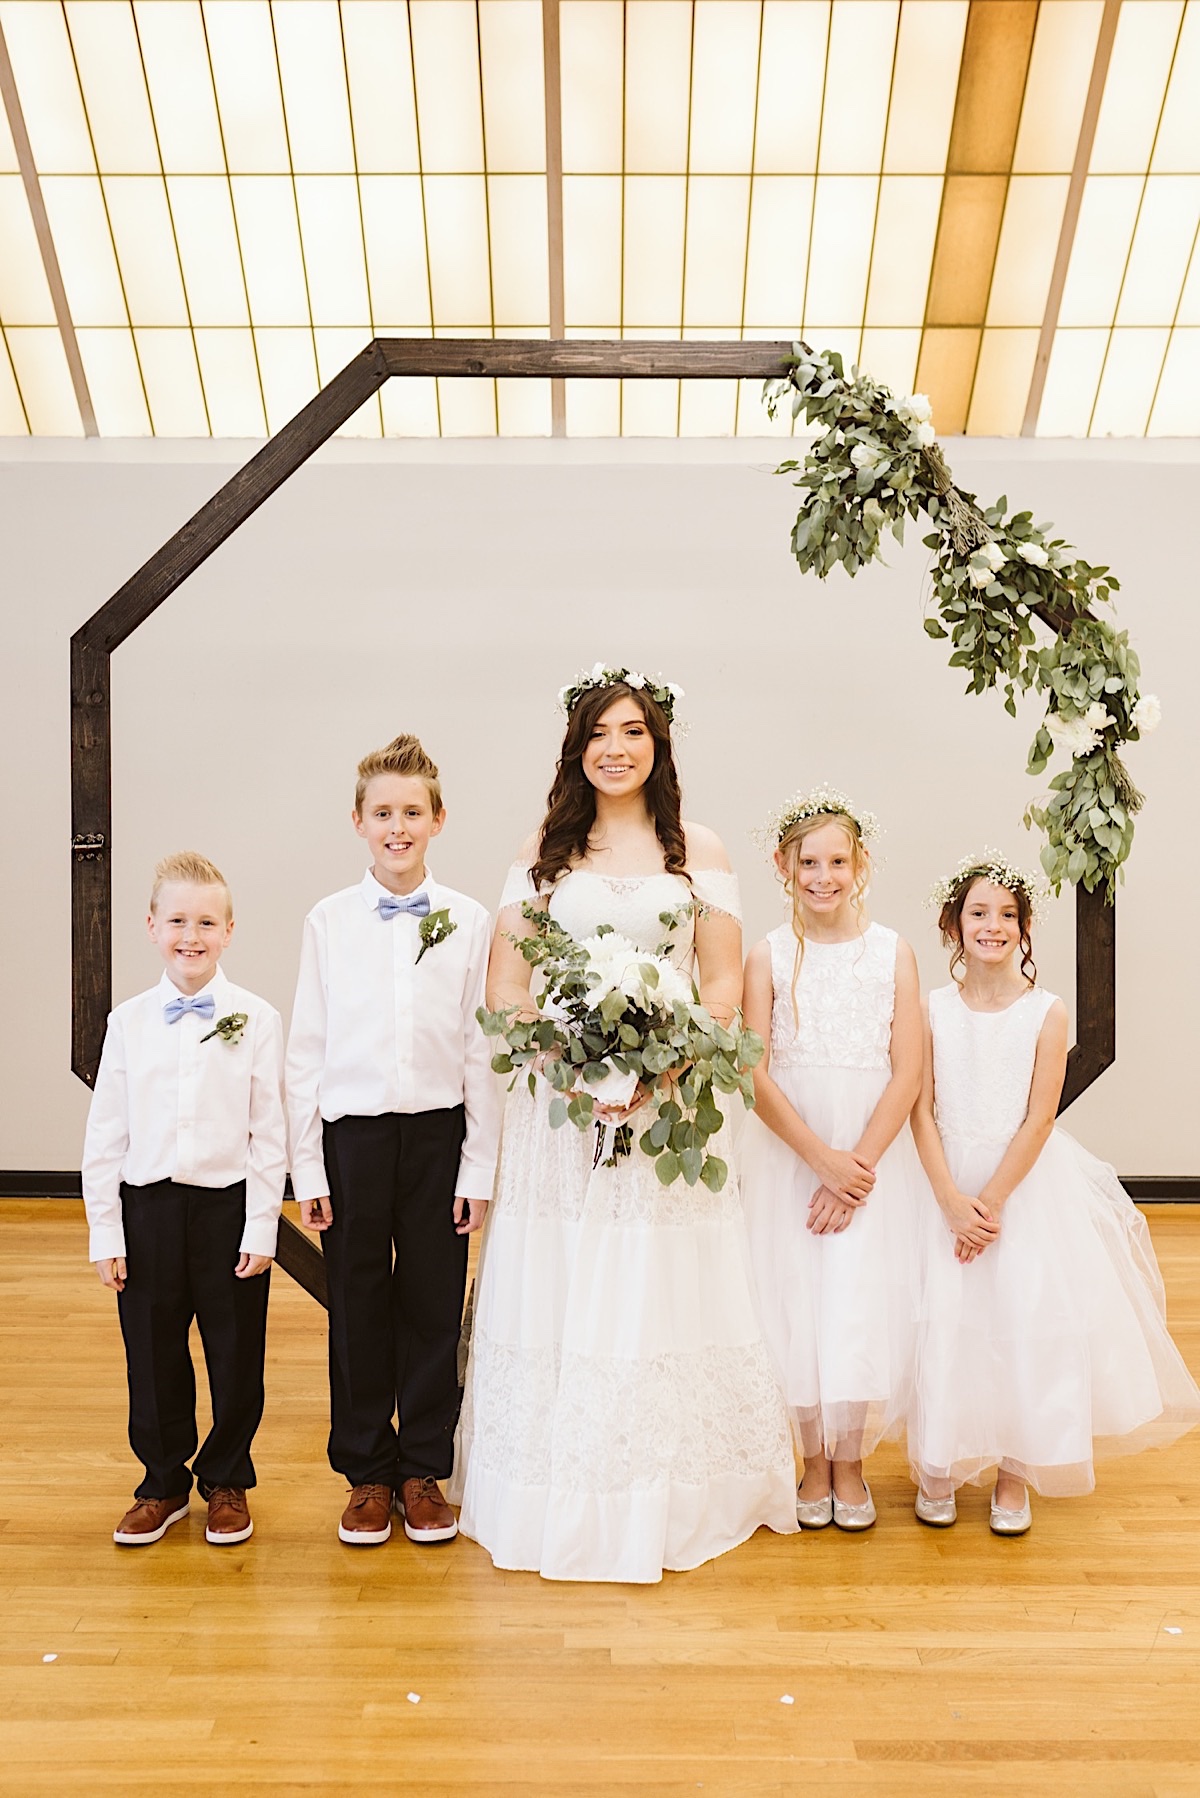 Bride with white and green bouquet stands with ring bearers and flower girls in front of an octagonal wedding arch.